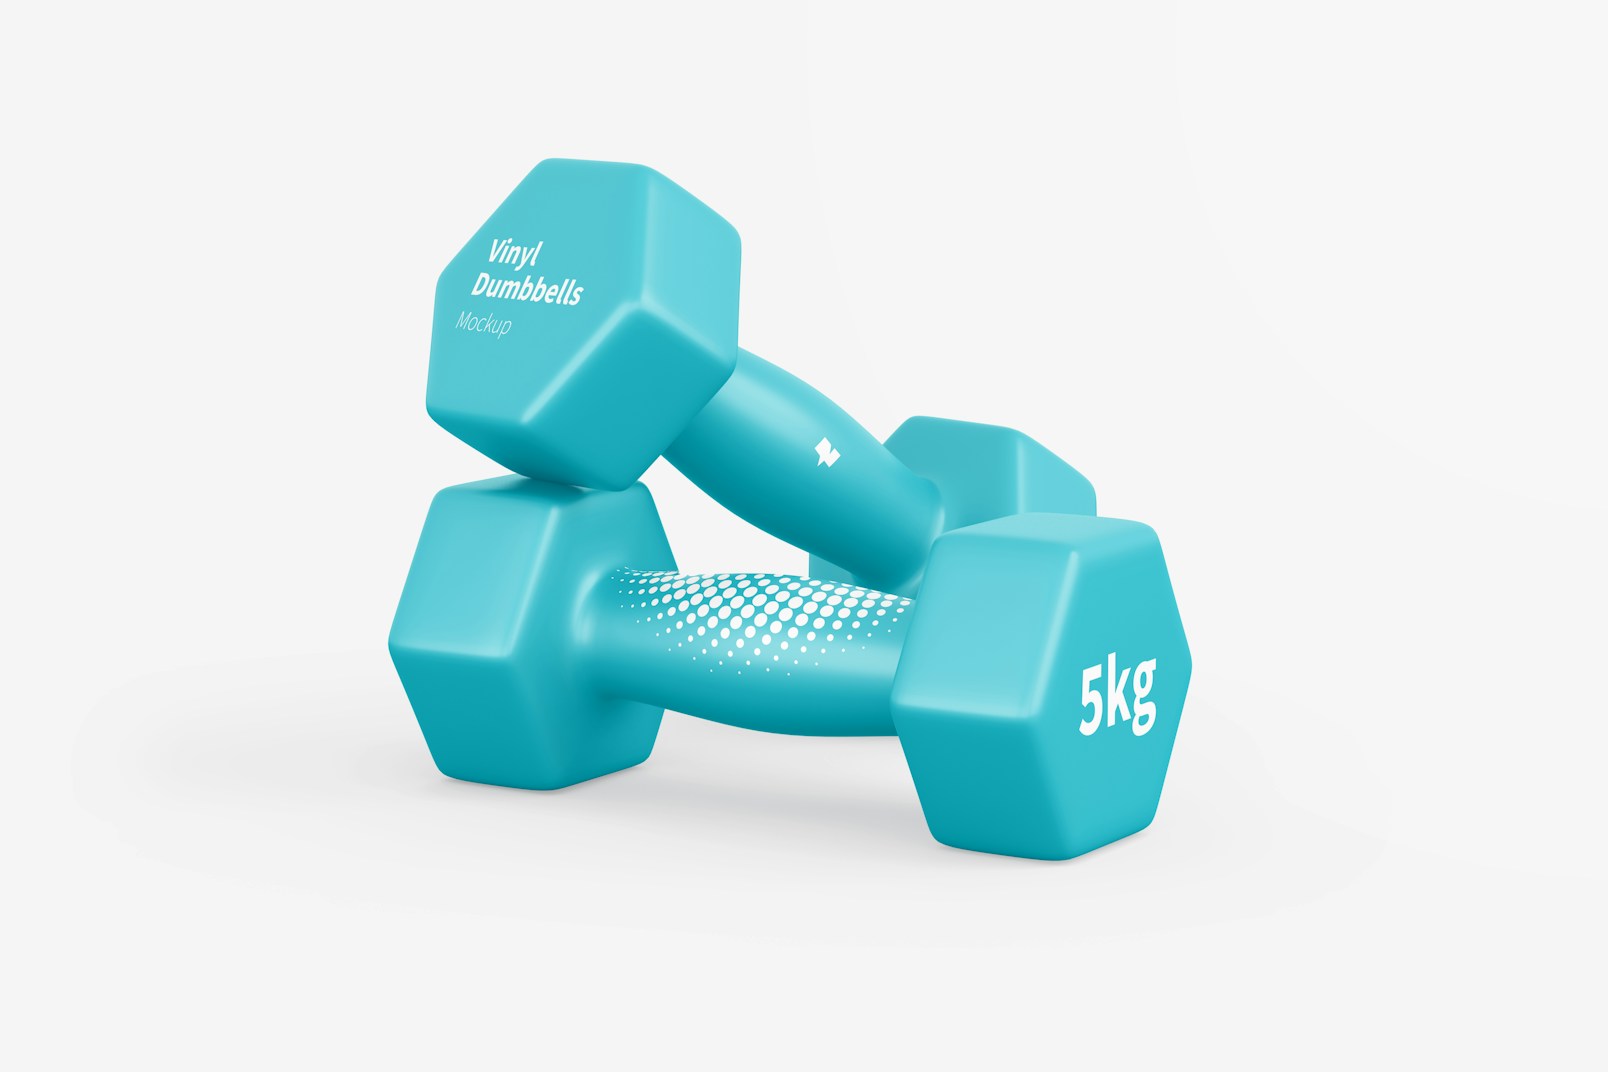 Vinyl Coated Dumbbells Mockup, Front View, Stacked